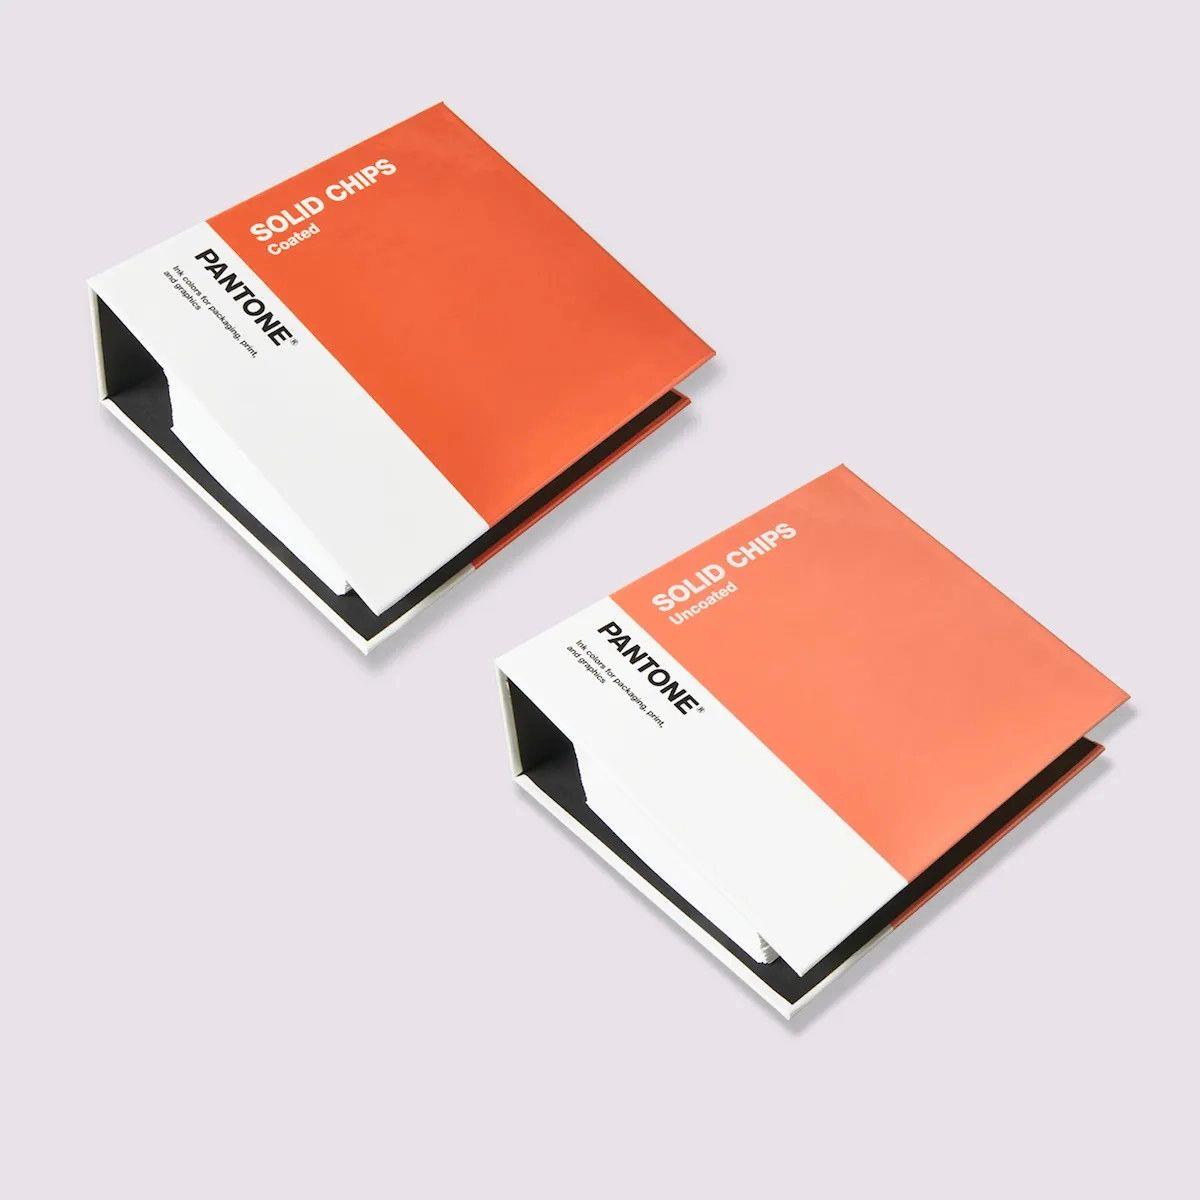 Image of Pantone Solid Chips Books